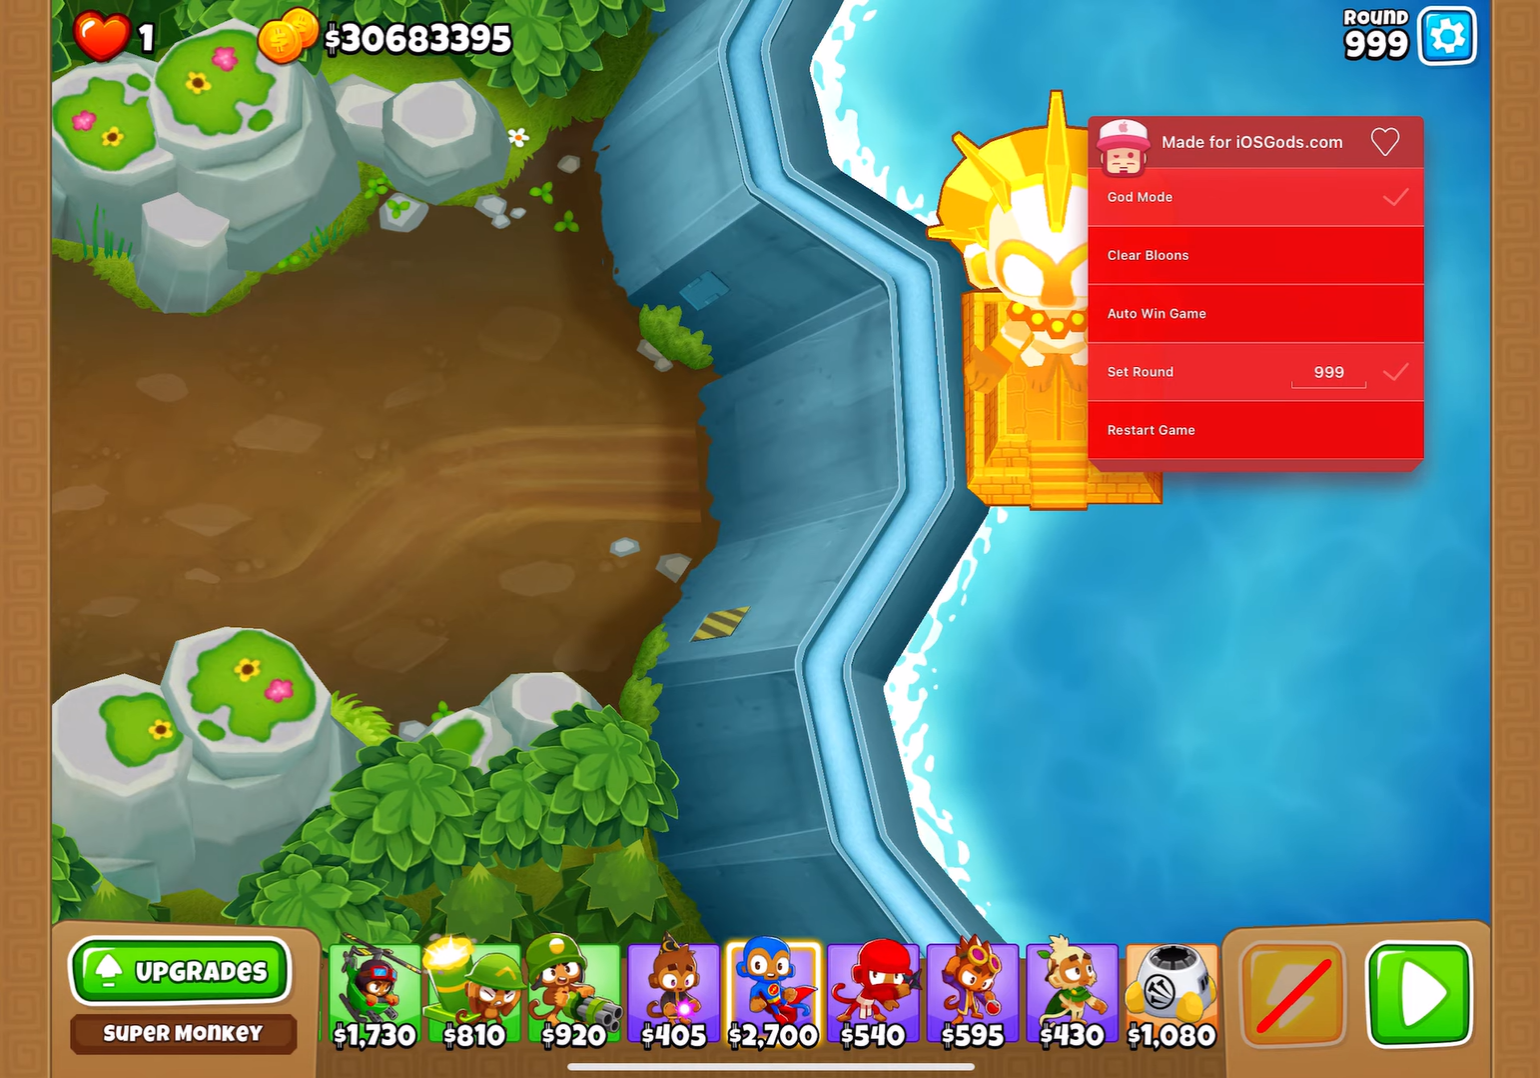 Using God Mode Hack in Bloons TD 6 Game on iPhone